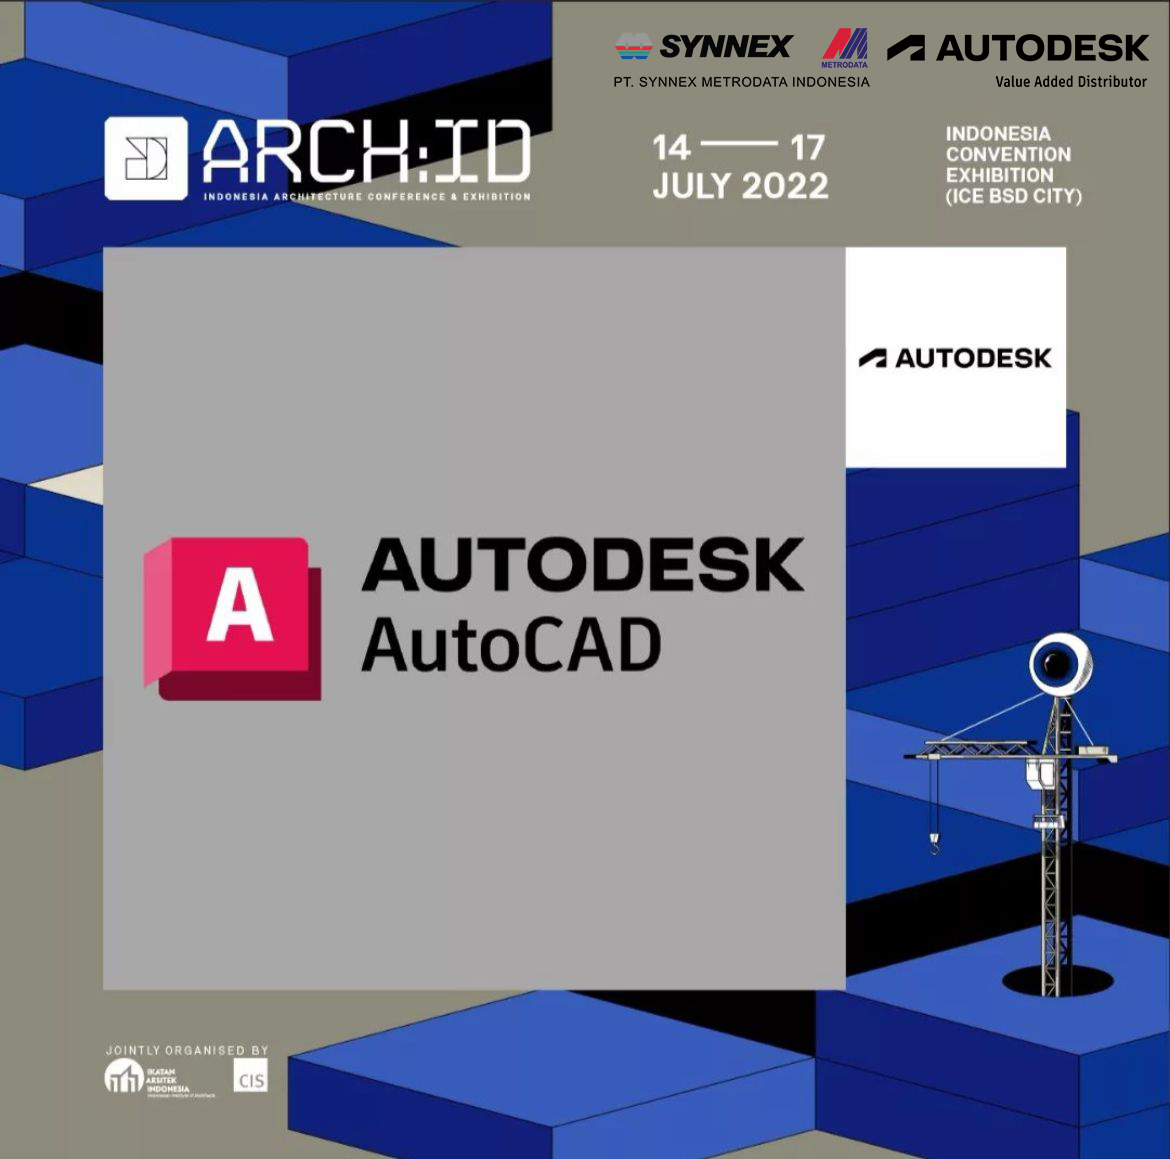 https://www.synnexmetrodata.com/wp-content/uploads/2022/07/Event-Autodesk-x-Archid-The-Most-Awaited-Largest-Architects-Gathering-in-Indonesia.jpg